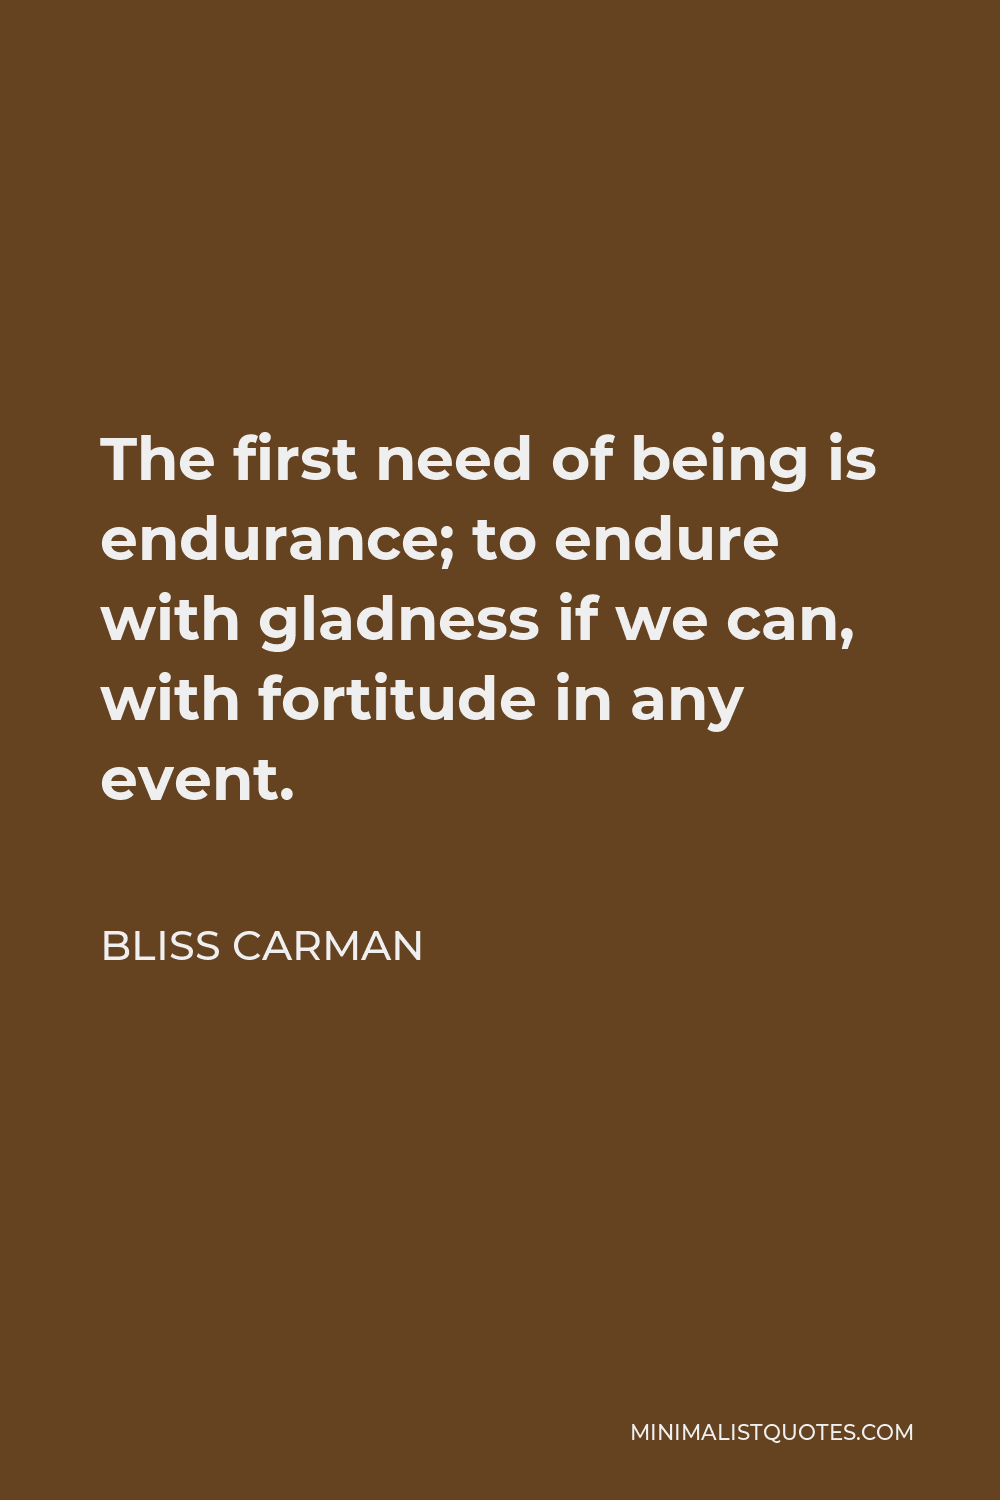 Bliss Carman Quote - The first need of being is endurance; to endure with gladness if we can, with fortitude in any event.